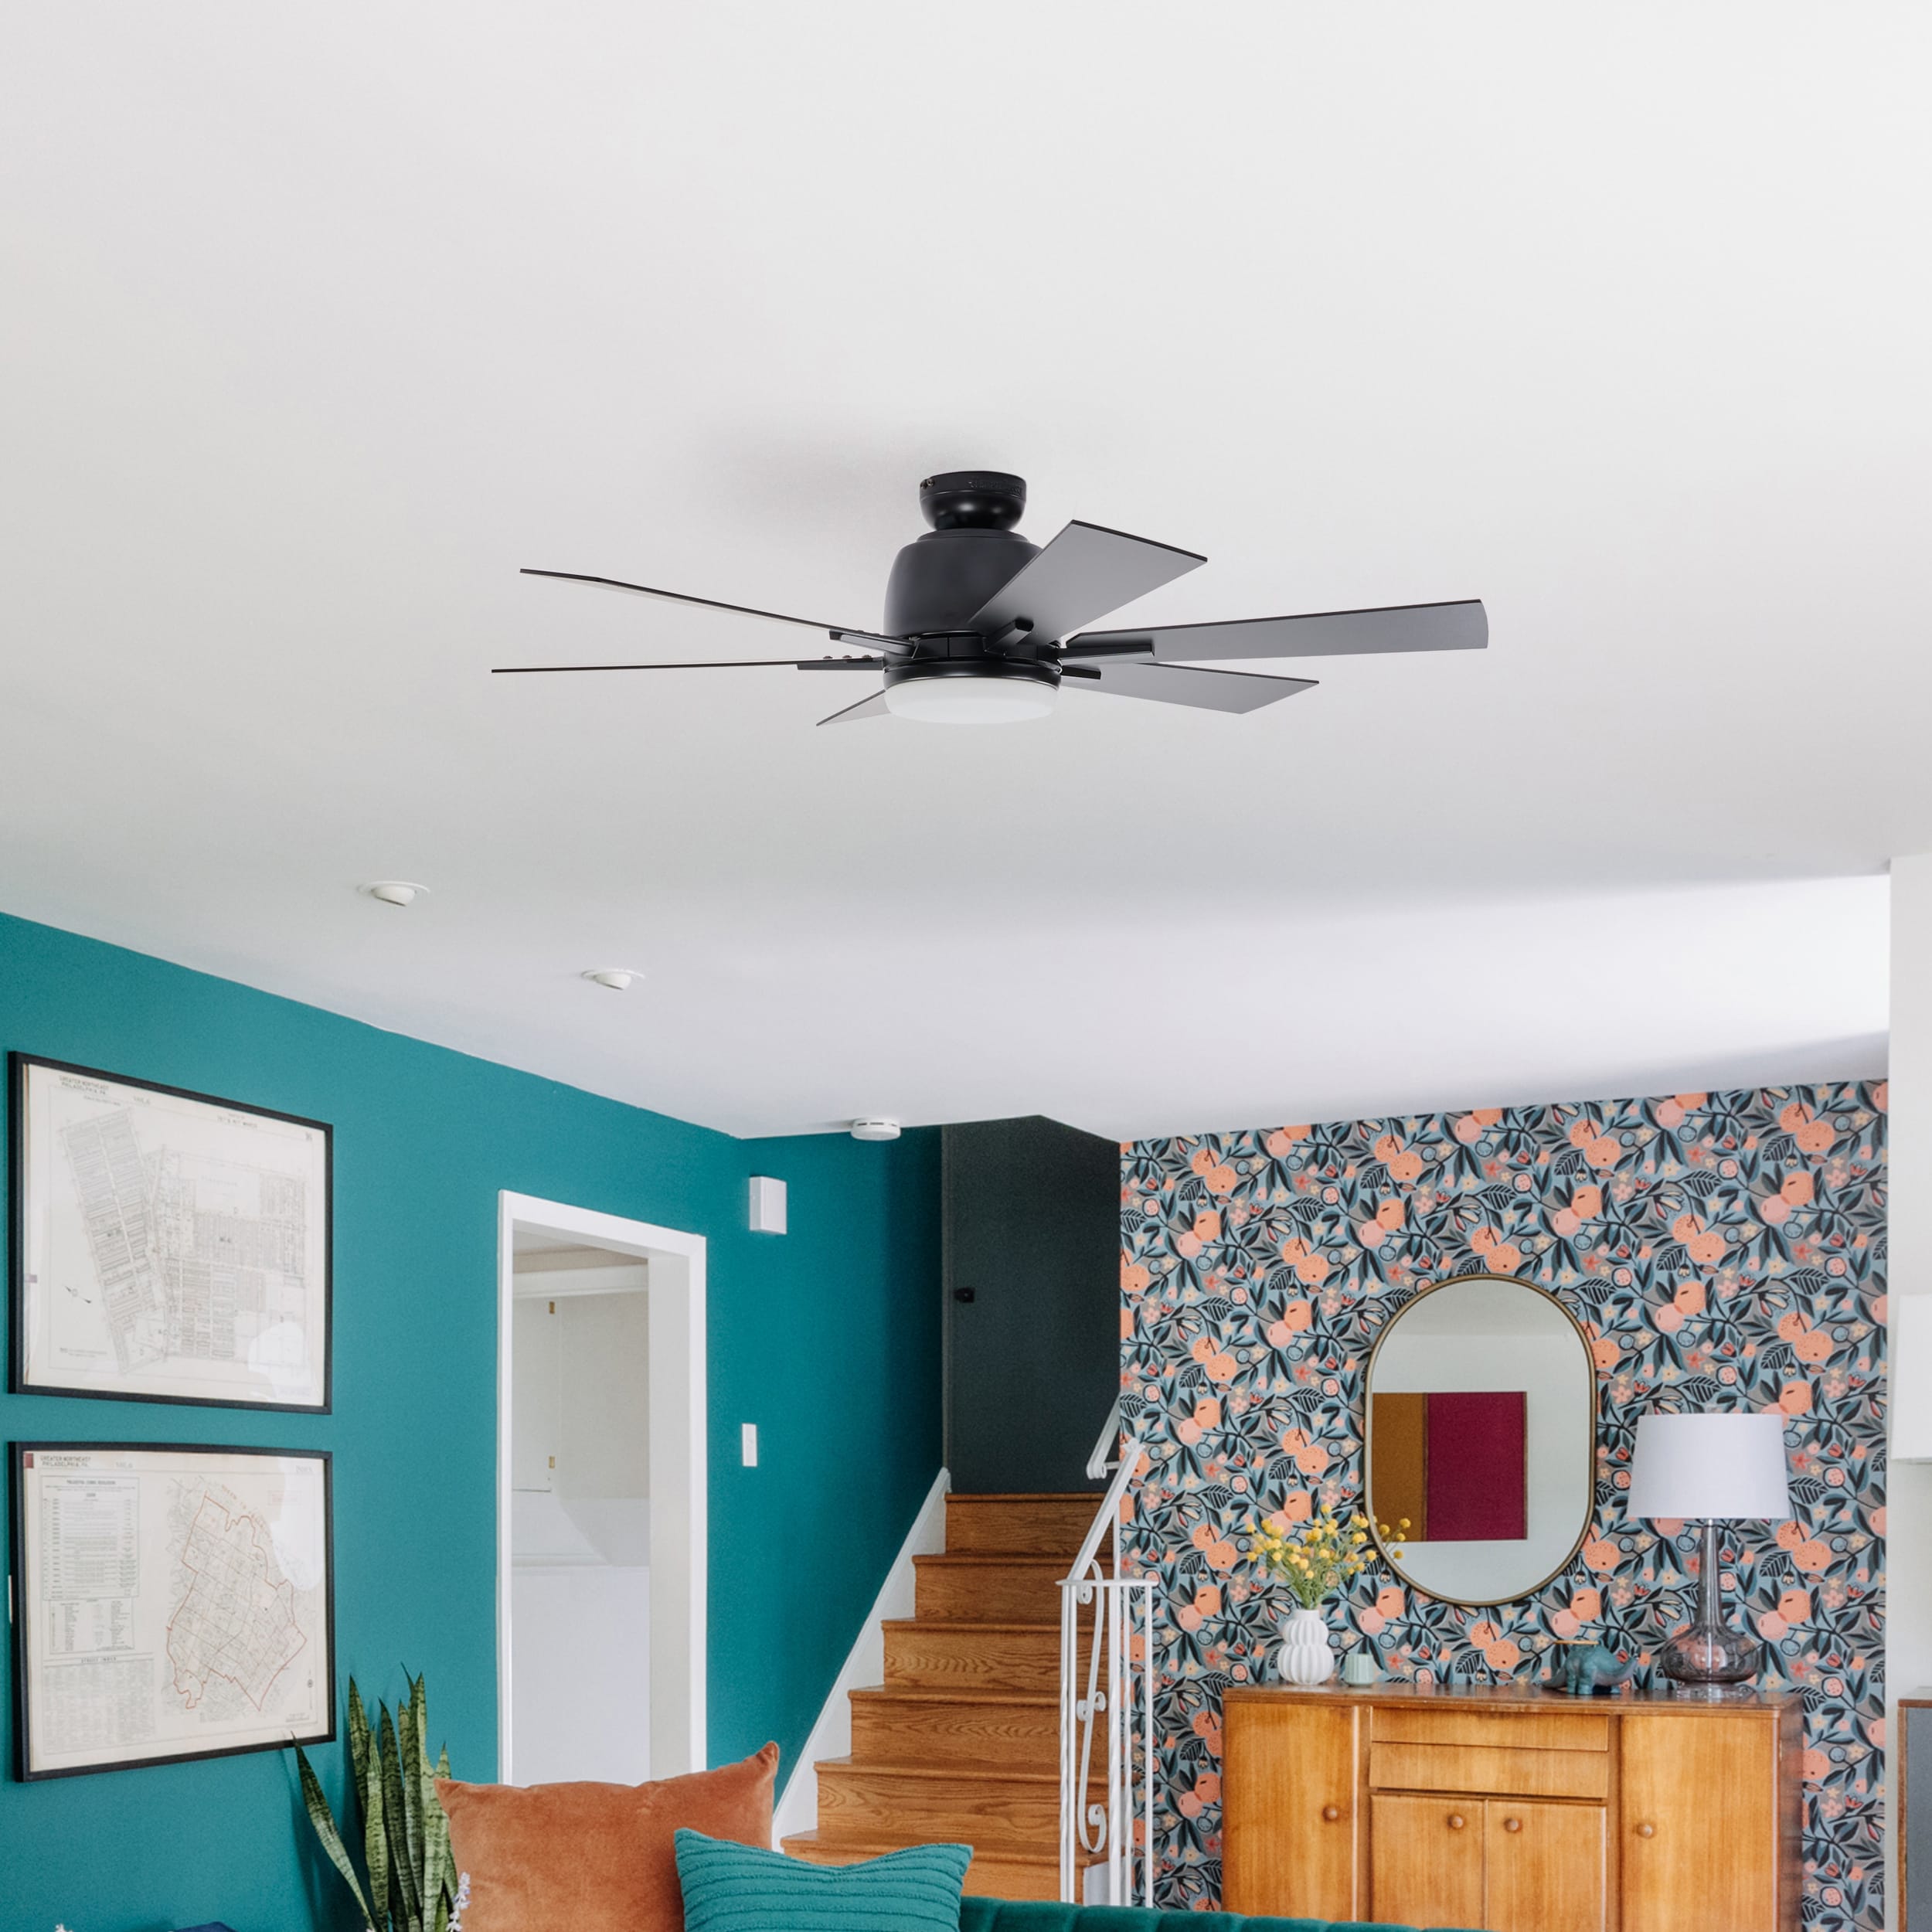 Harbor Breeze Bradbury 48-in Matte Black Integrated LED Indoor Downrod or  Flush Mount Ceiling Fan with Light and Remote (6-Blade)